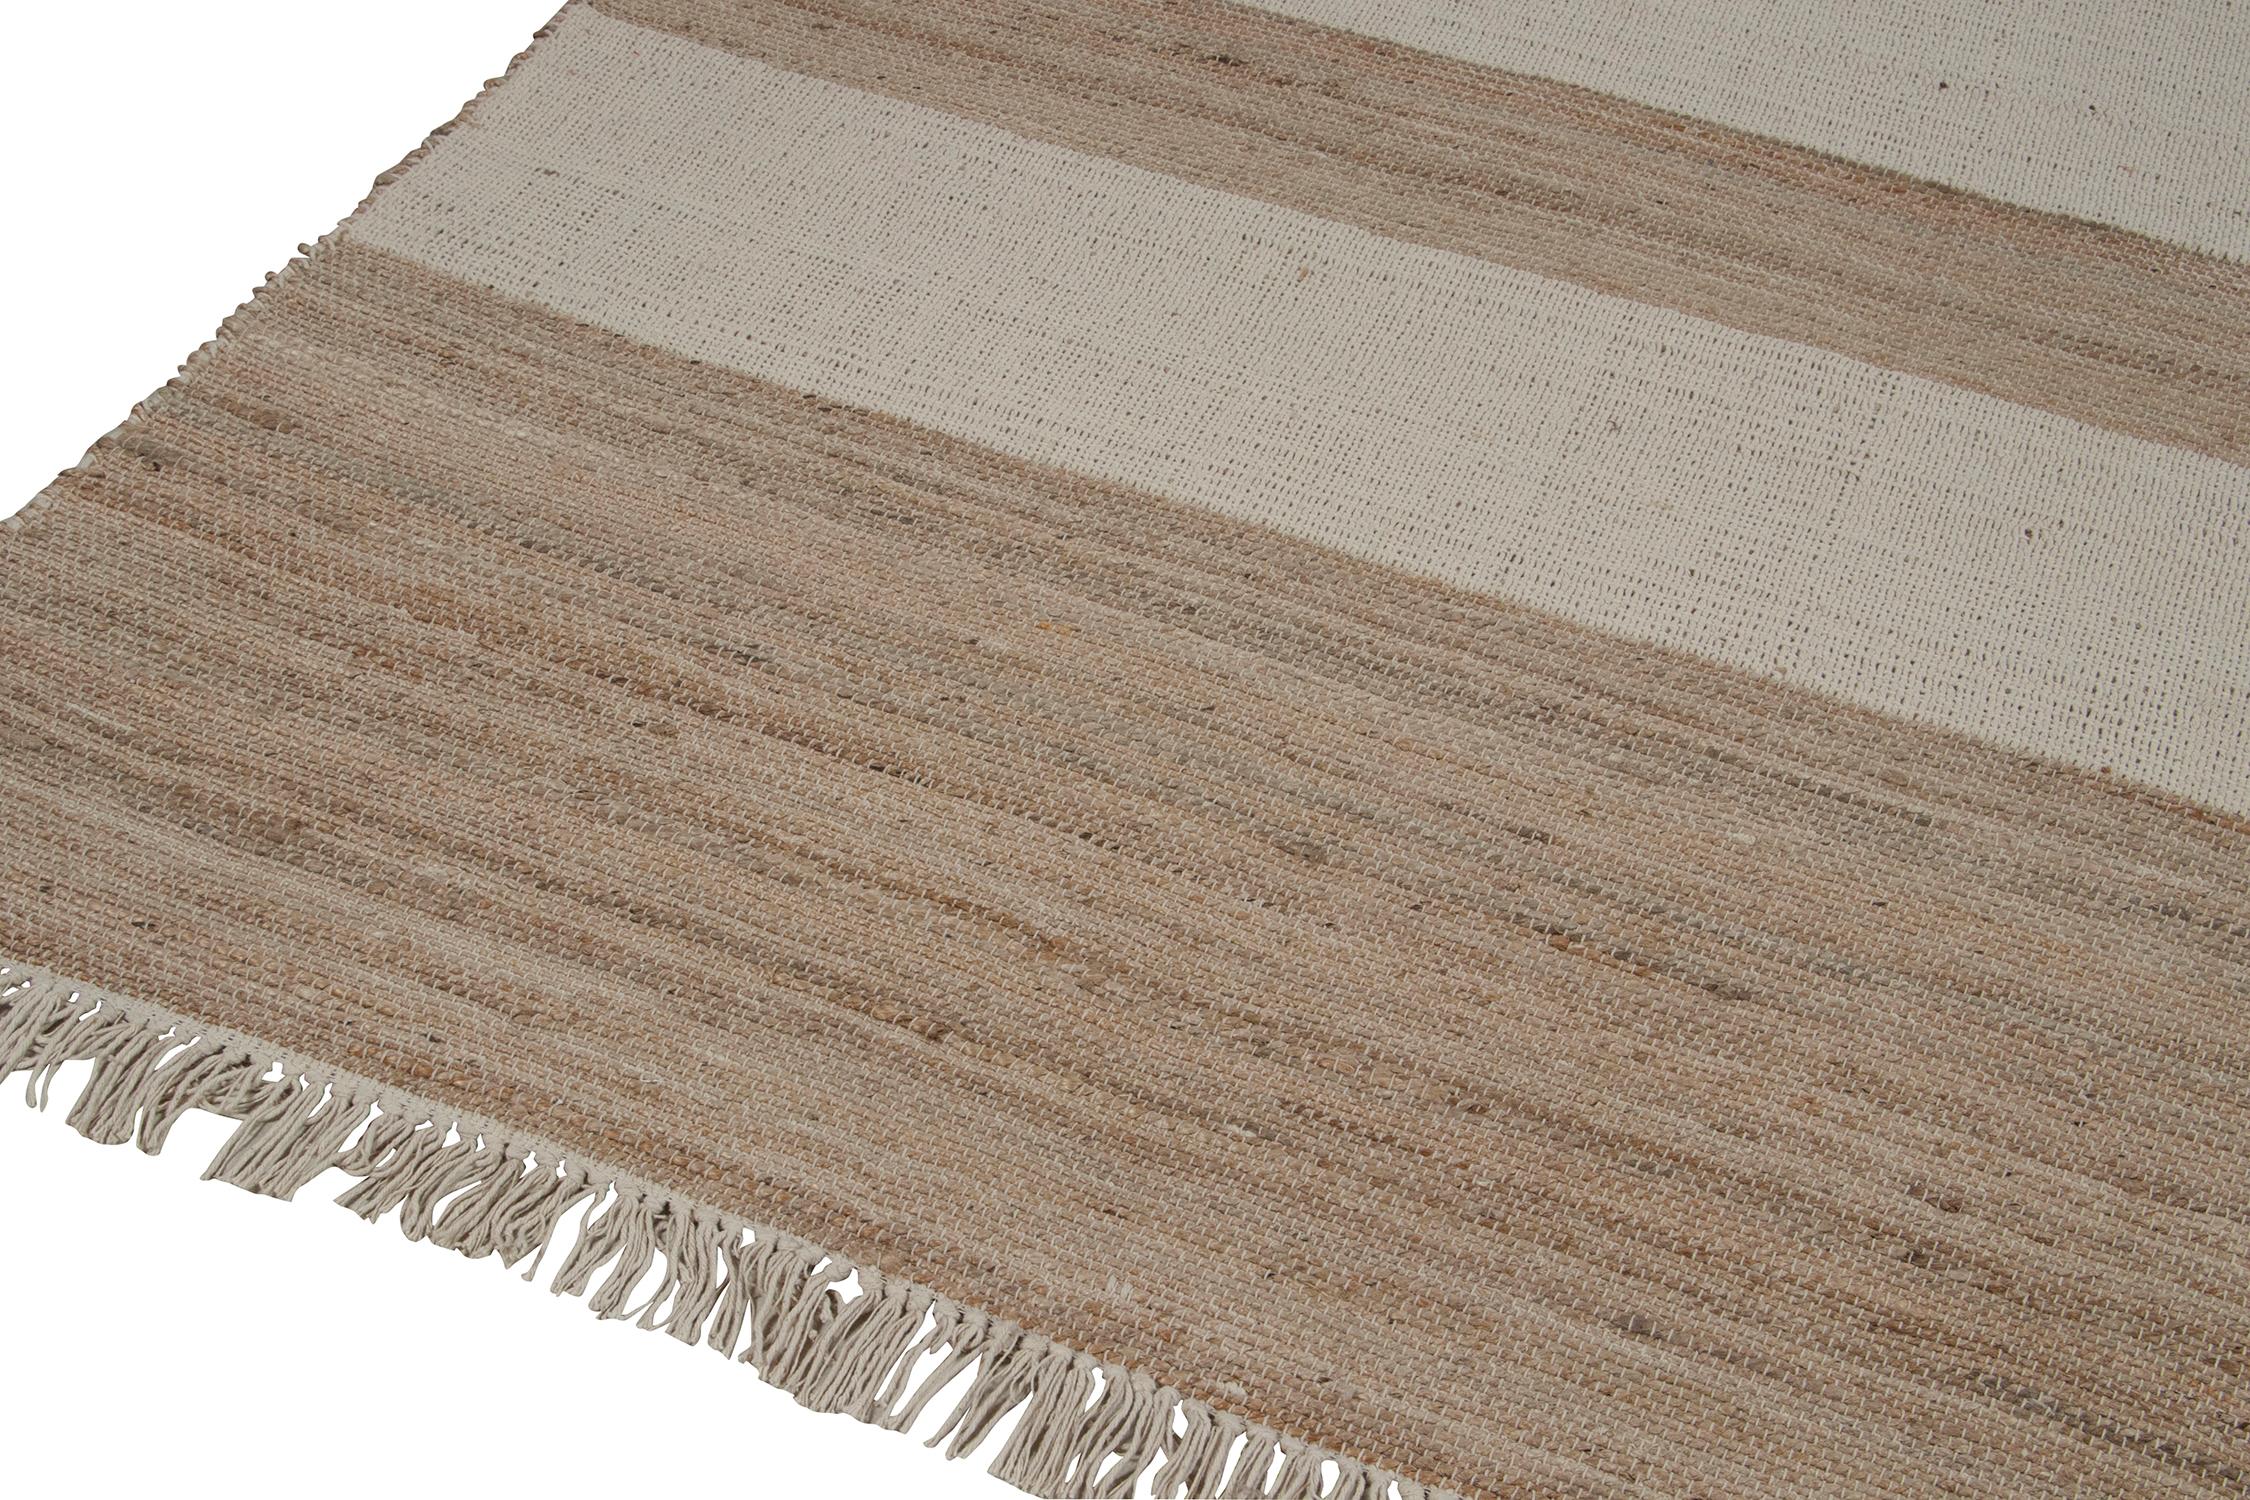 Rug & Kilim’s Contemporary Jute Kilim in White and Beige-Brown Stripes In New Condition For Sale In Long Island City, NY